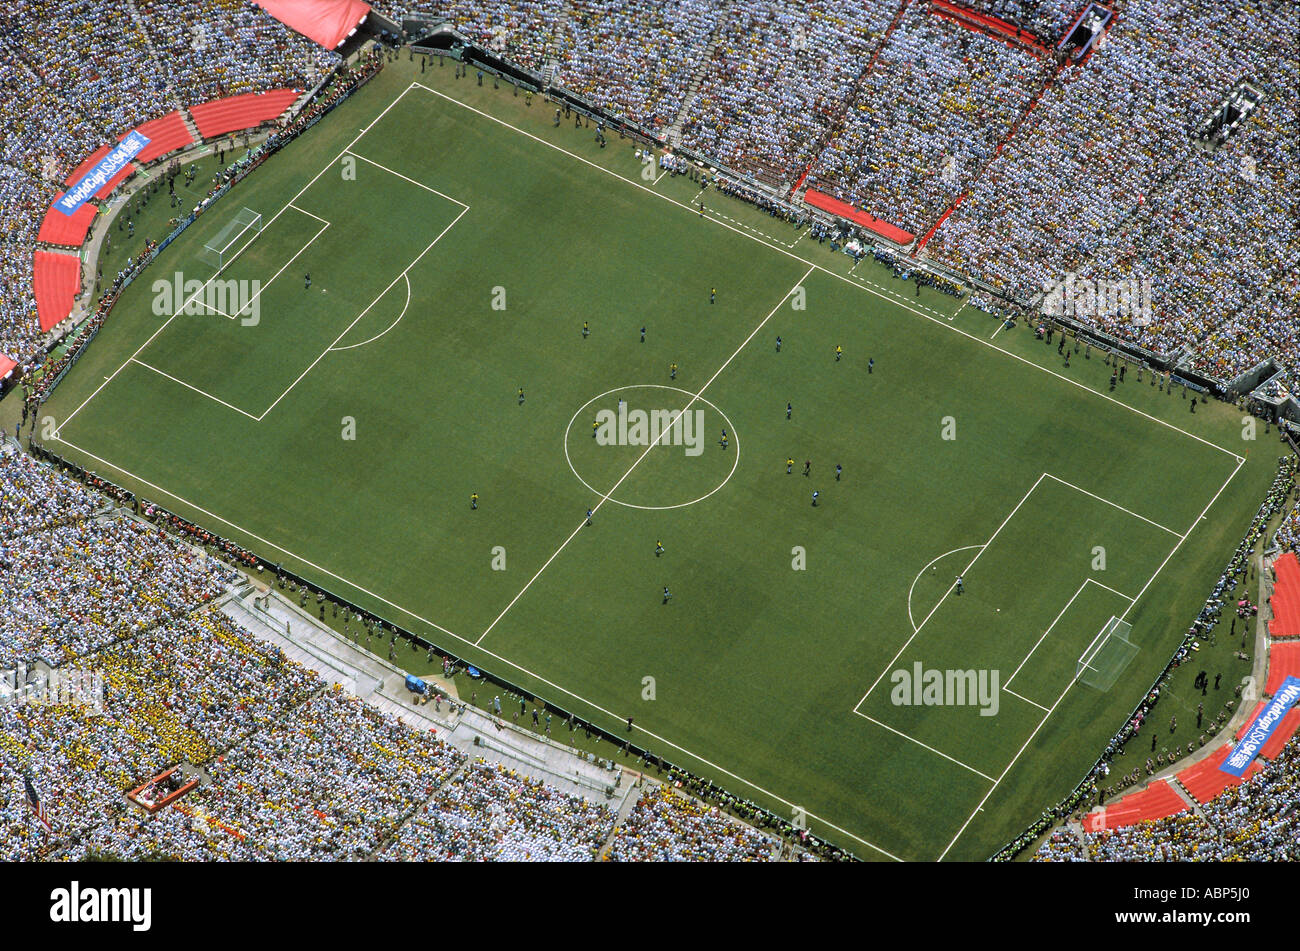 Aerial view of the Rosebowl, Pasadena, California, during the World Championship Soccer Final between Brazil and Italy 1994 Stock Photo